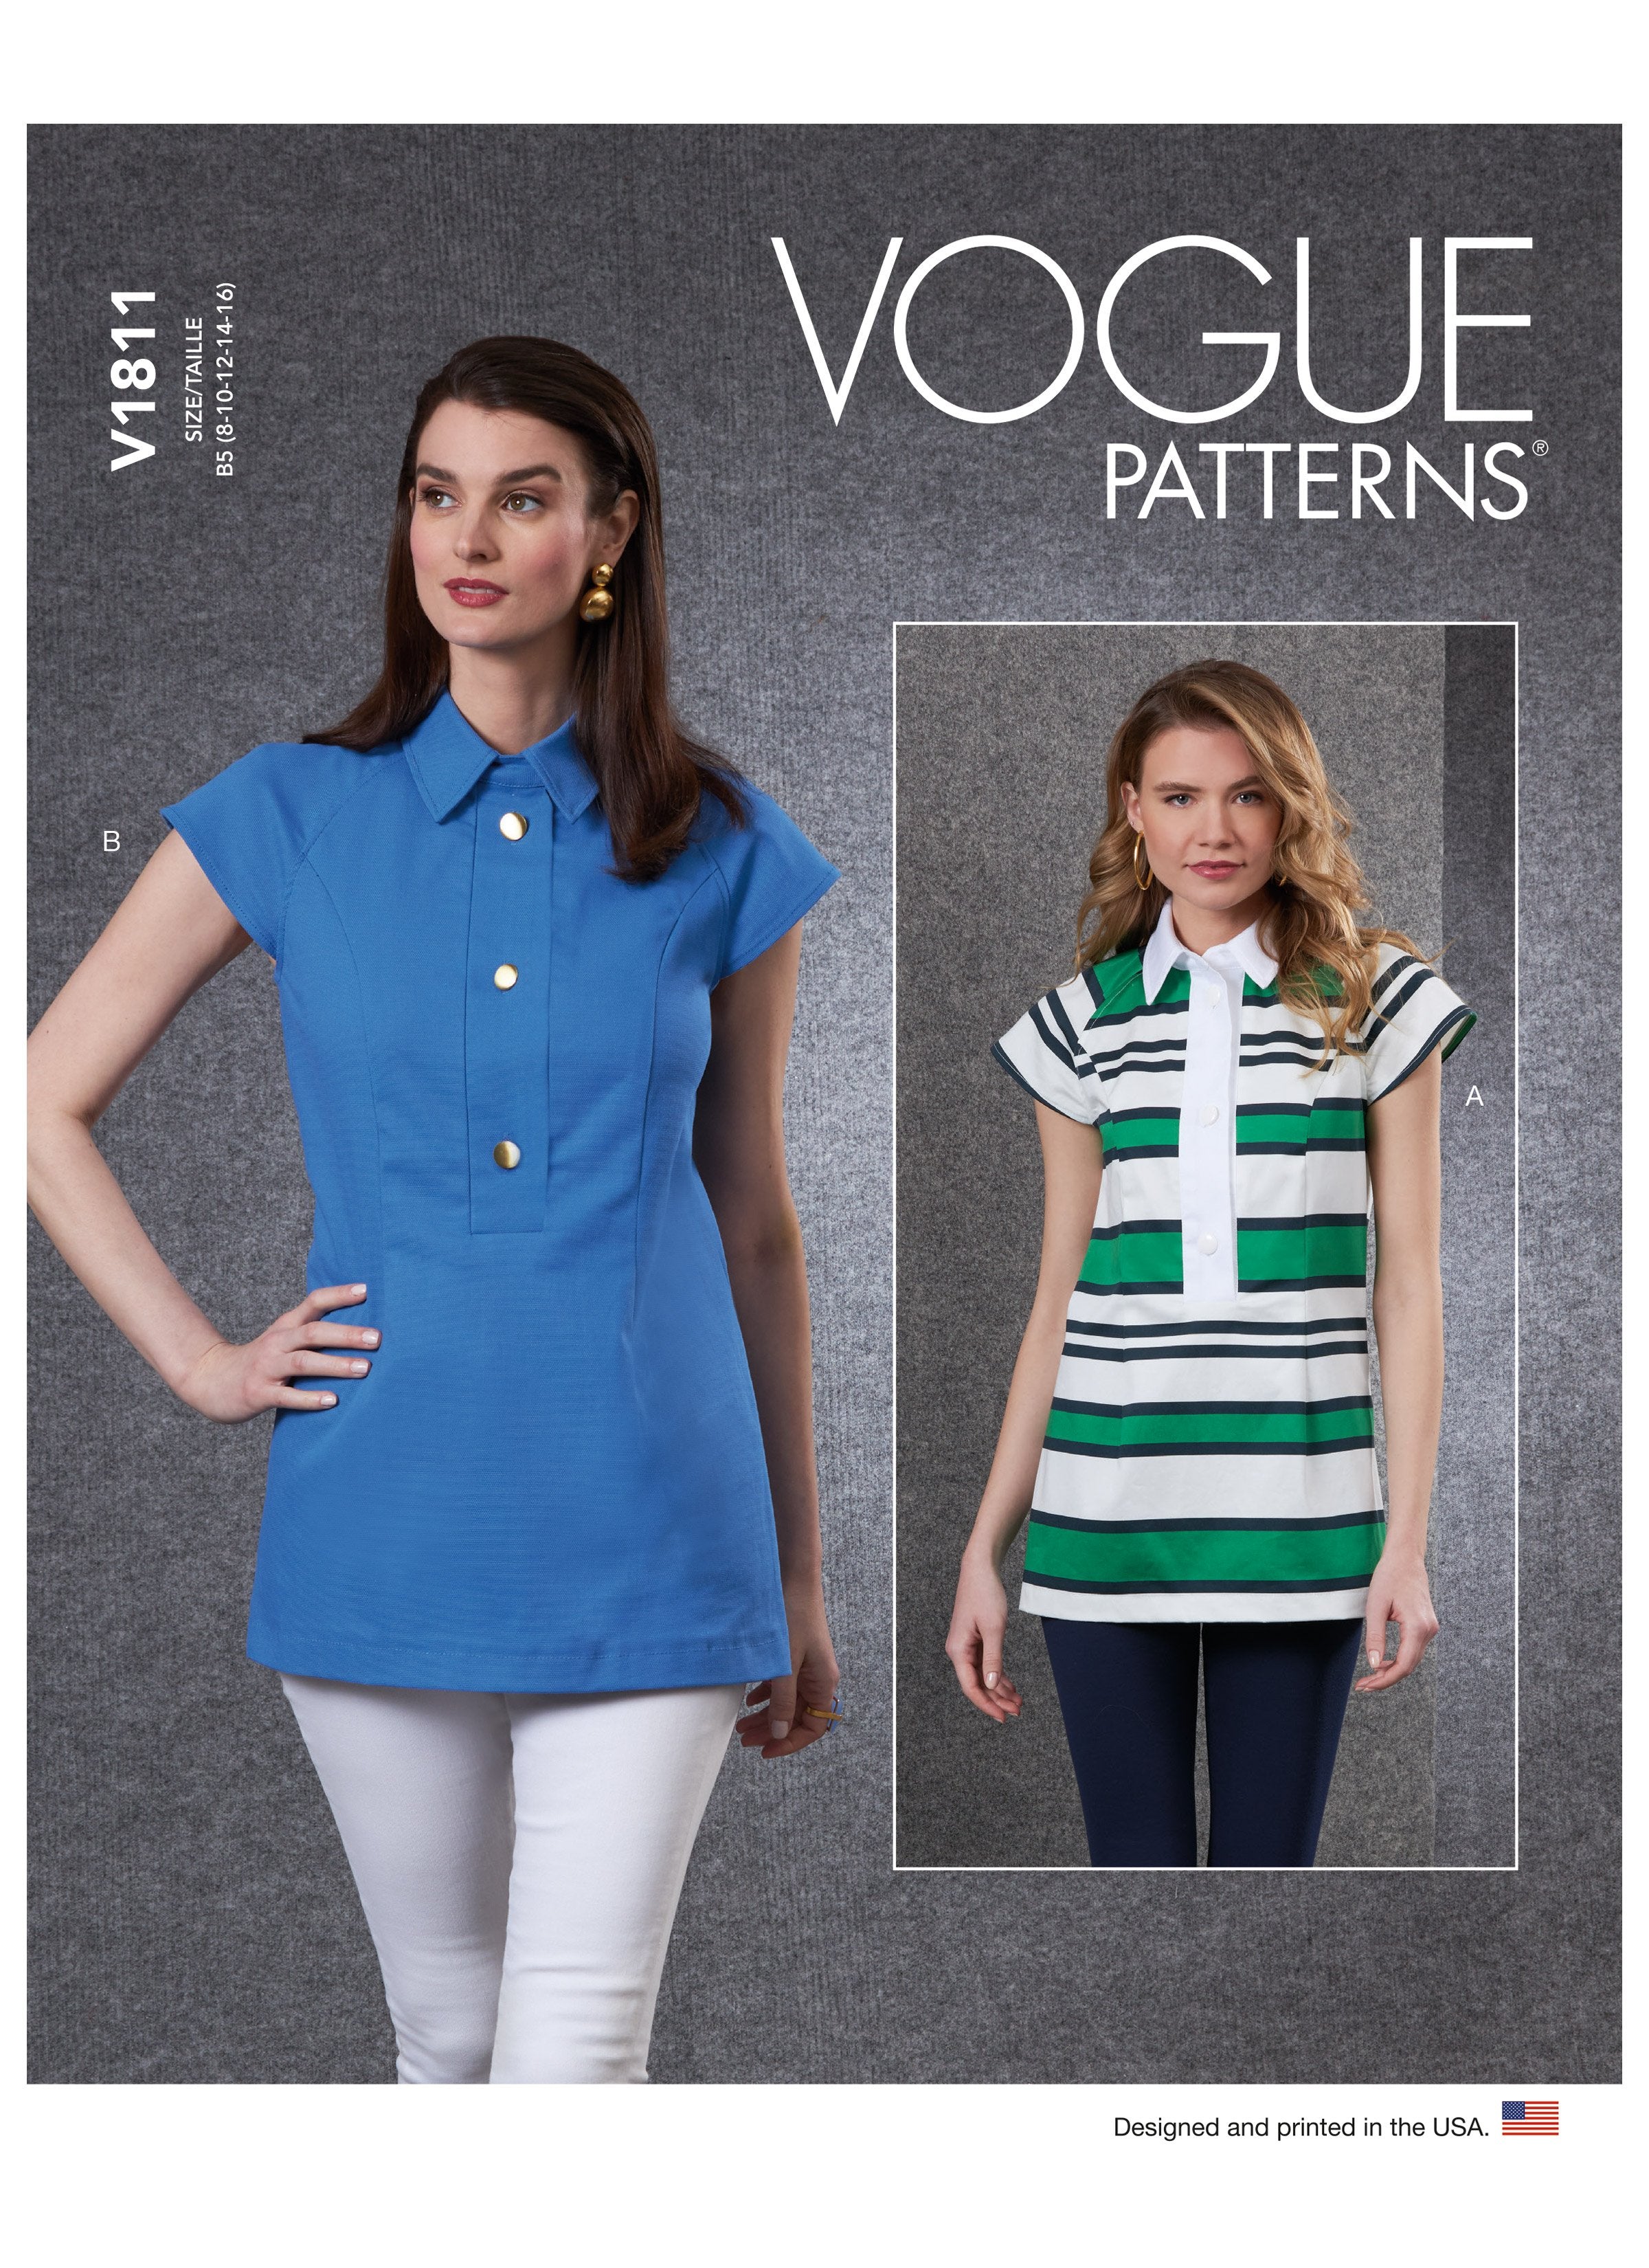 Vogue Sewing pattern 1811 Misses' Tops from Jaycotts Sewing Supplies